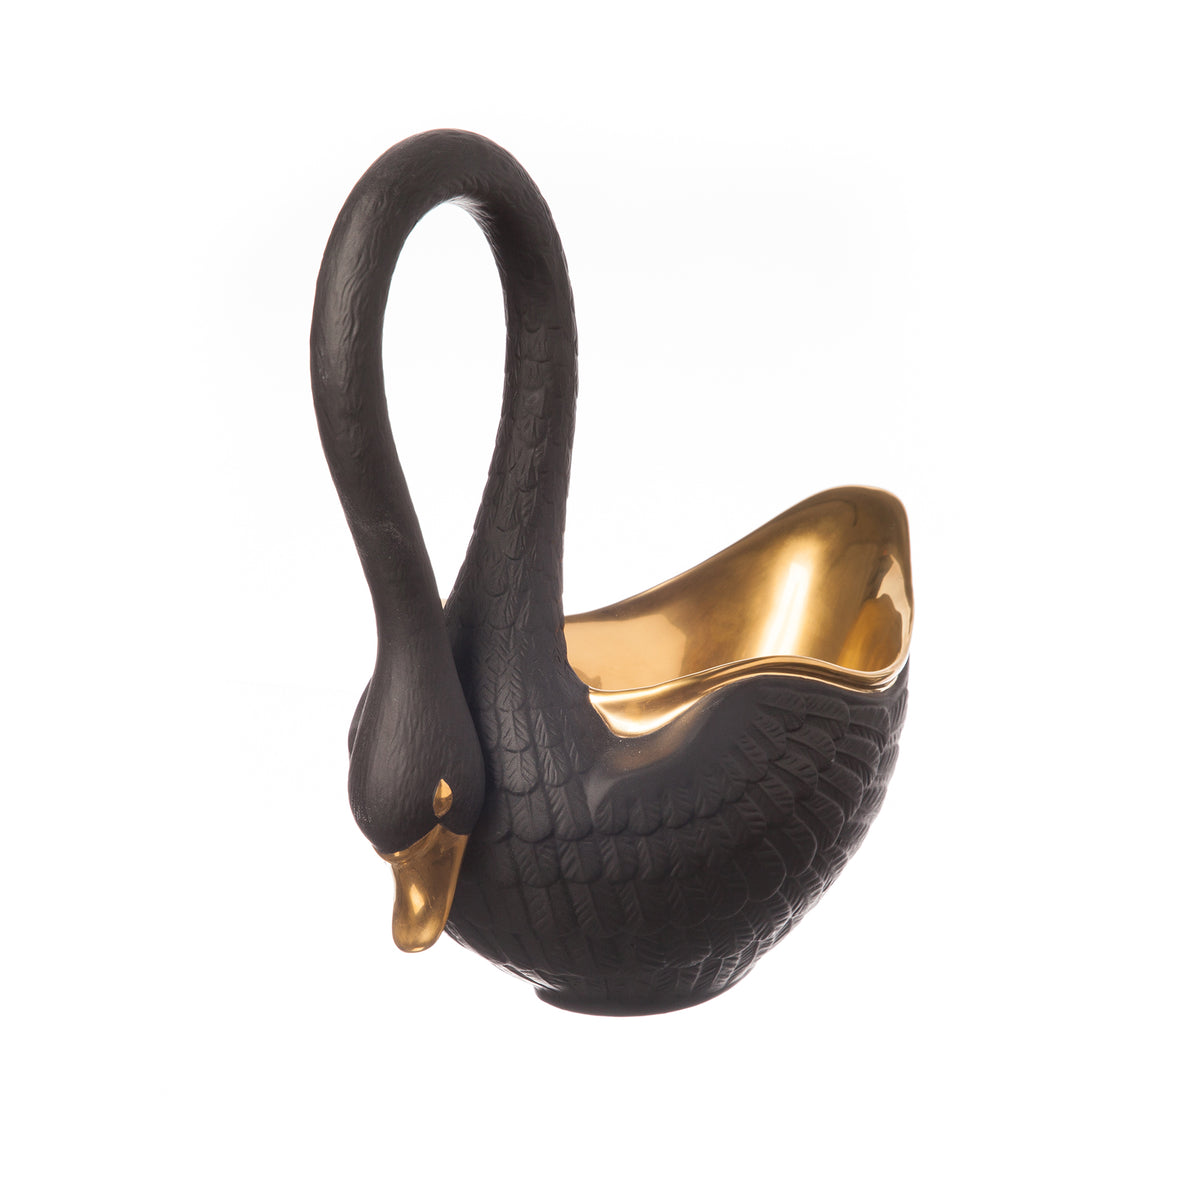 Grand Black Swan Bowl with 24K Gold